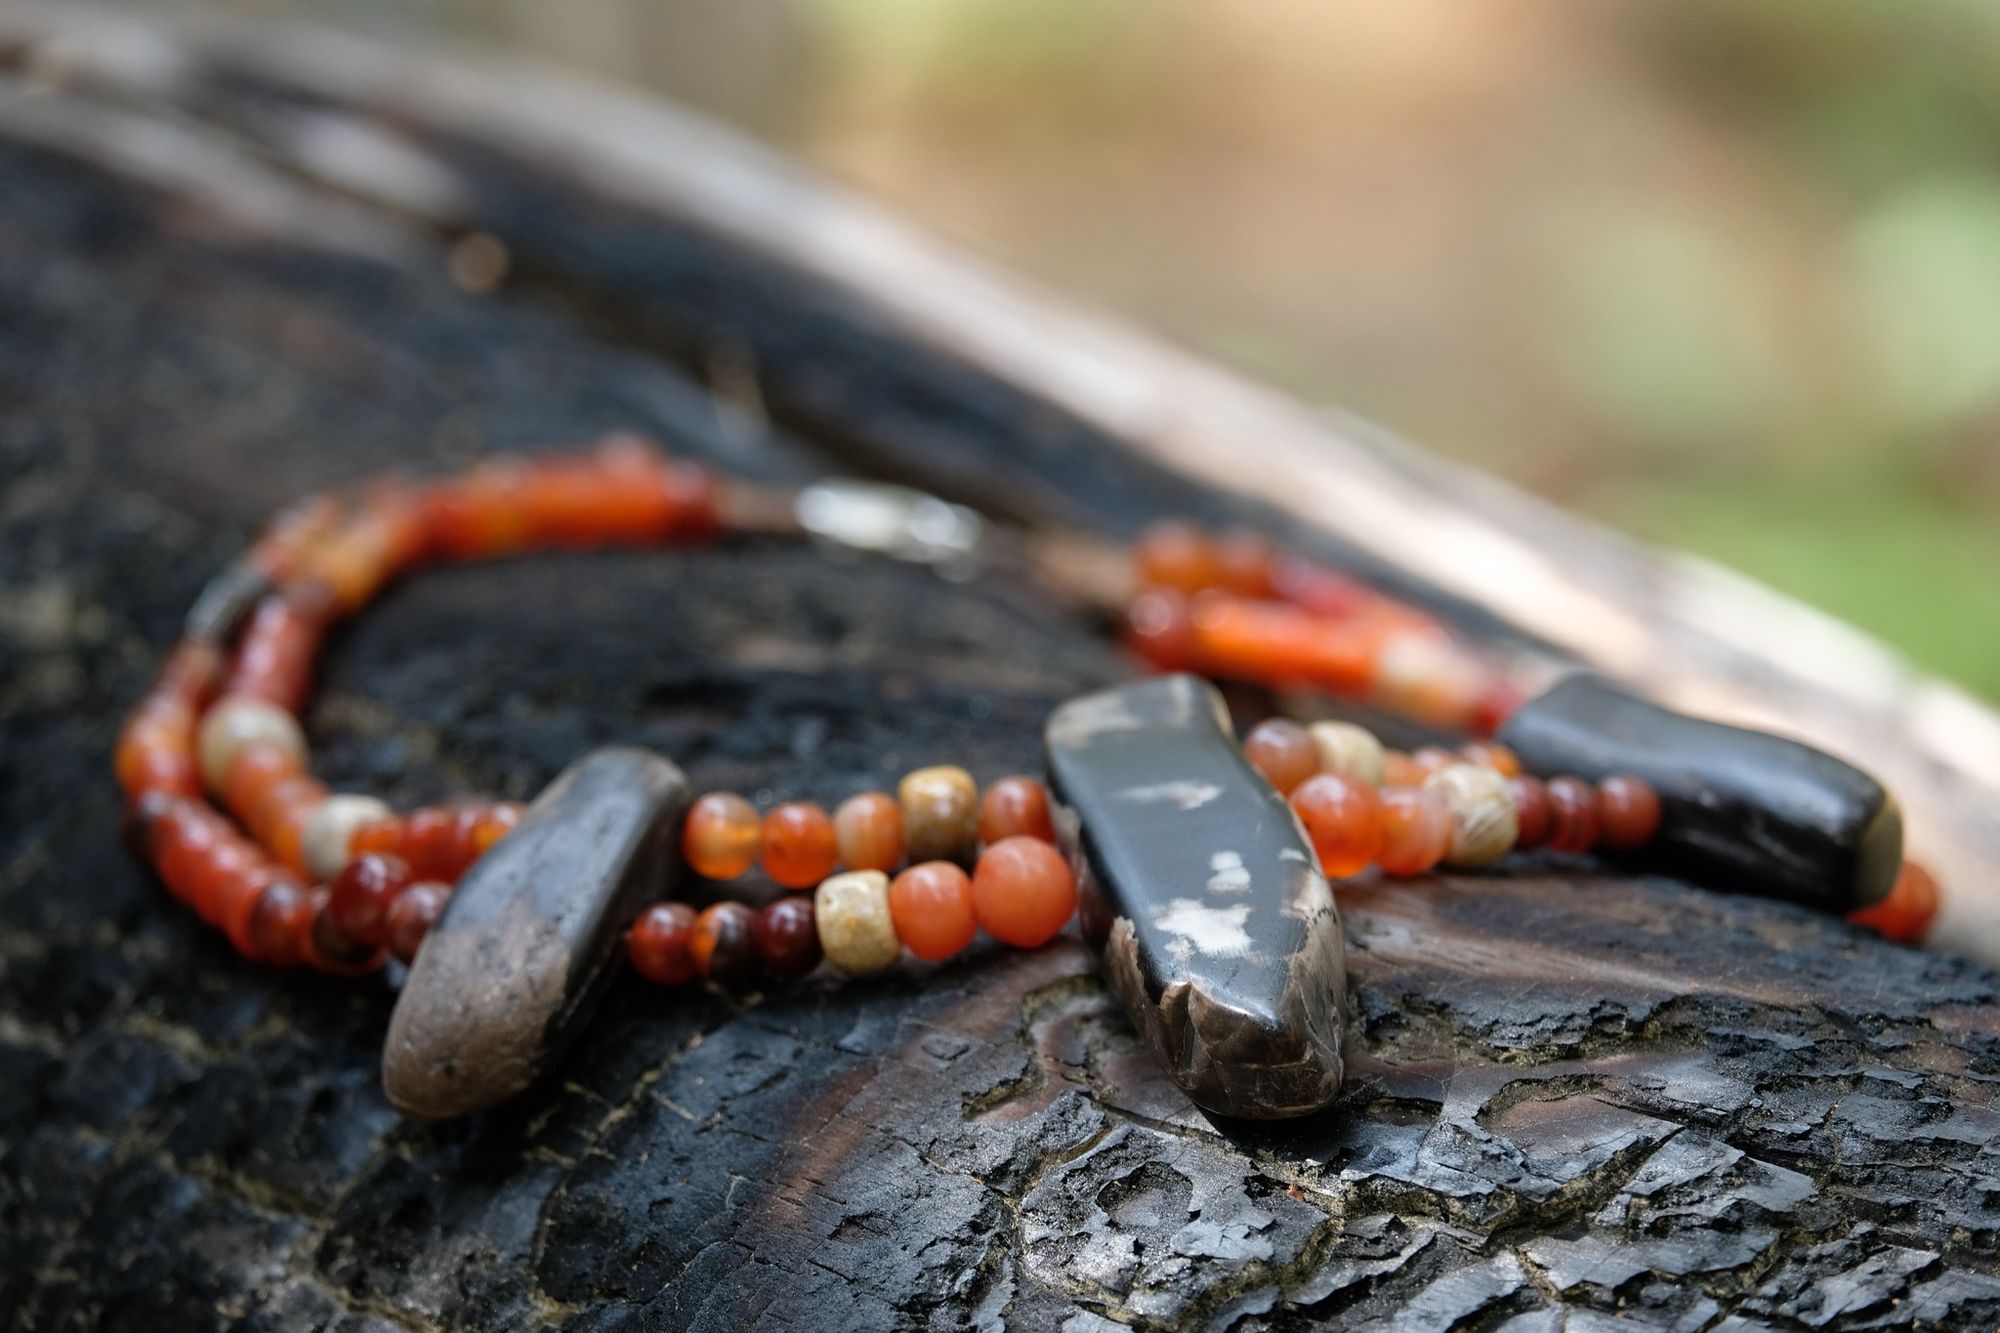 Detail of dark petrified wood, tan fossilized coral and red orange carnelian necklace on a burned log